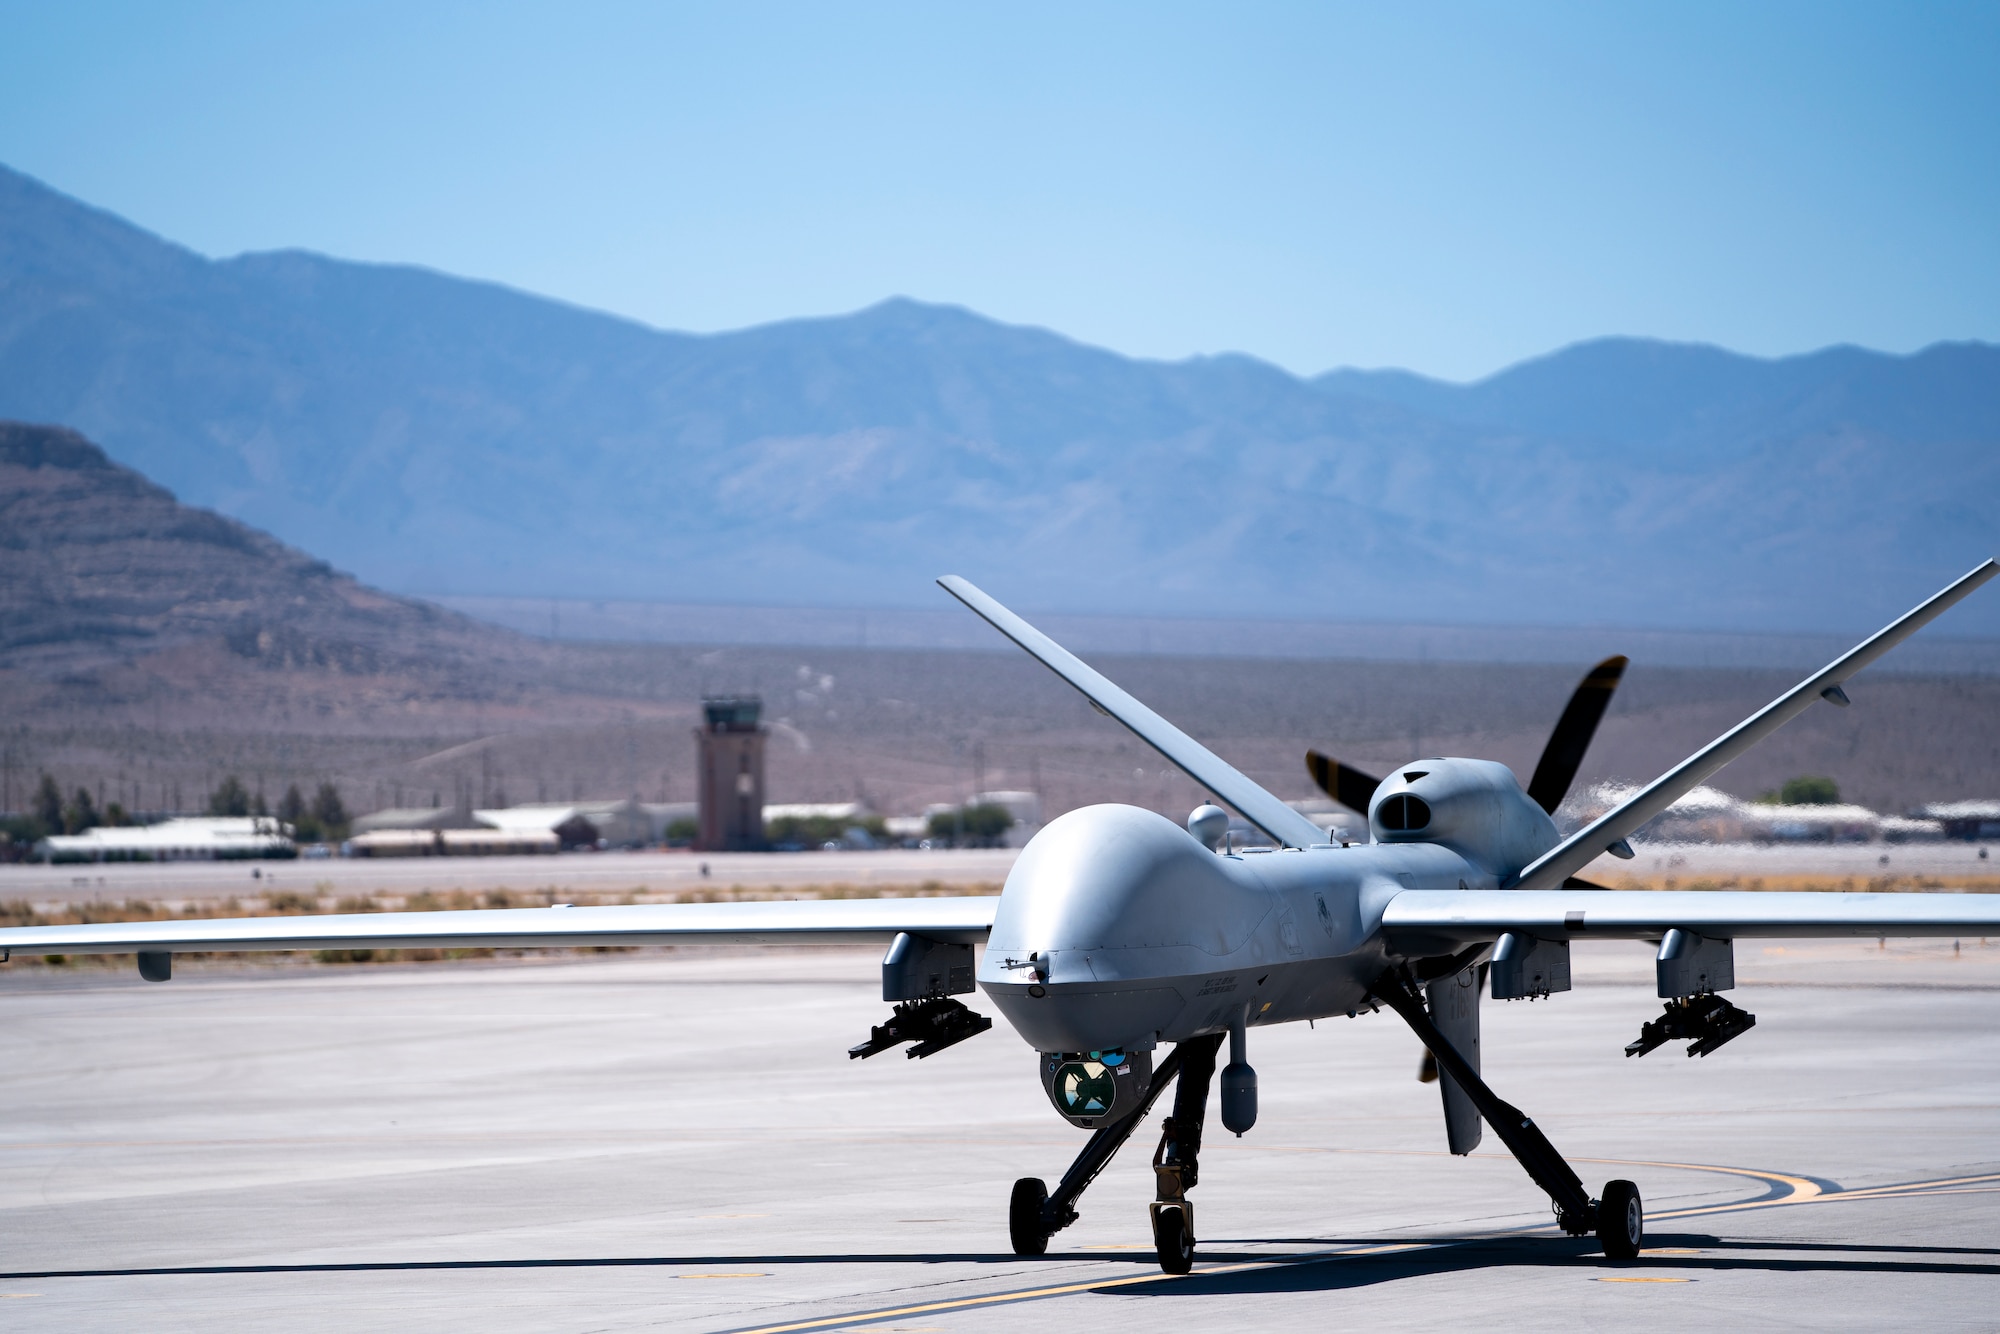 A U.S. Air Force MQ-9 Reaper taxis in for a warm refuel test, where the aircraft is grounded and refueled while powered on but with the engine not running, at Creech Air Force Base, Nevada, Sept. 2, 2021. Warm refuels can increase the MQ-9’s operational agility through reducing turnaround time on the ground. (U.S. Air Force photo by Tech. Sgt. Emerson Nuñez)